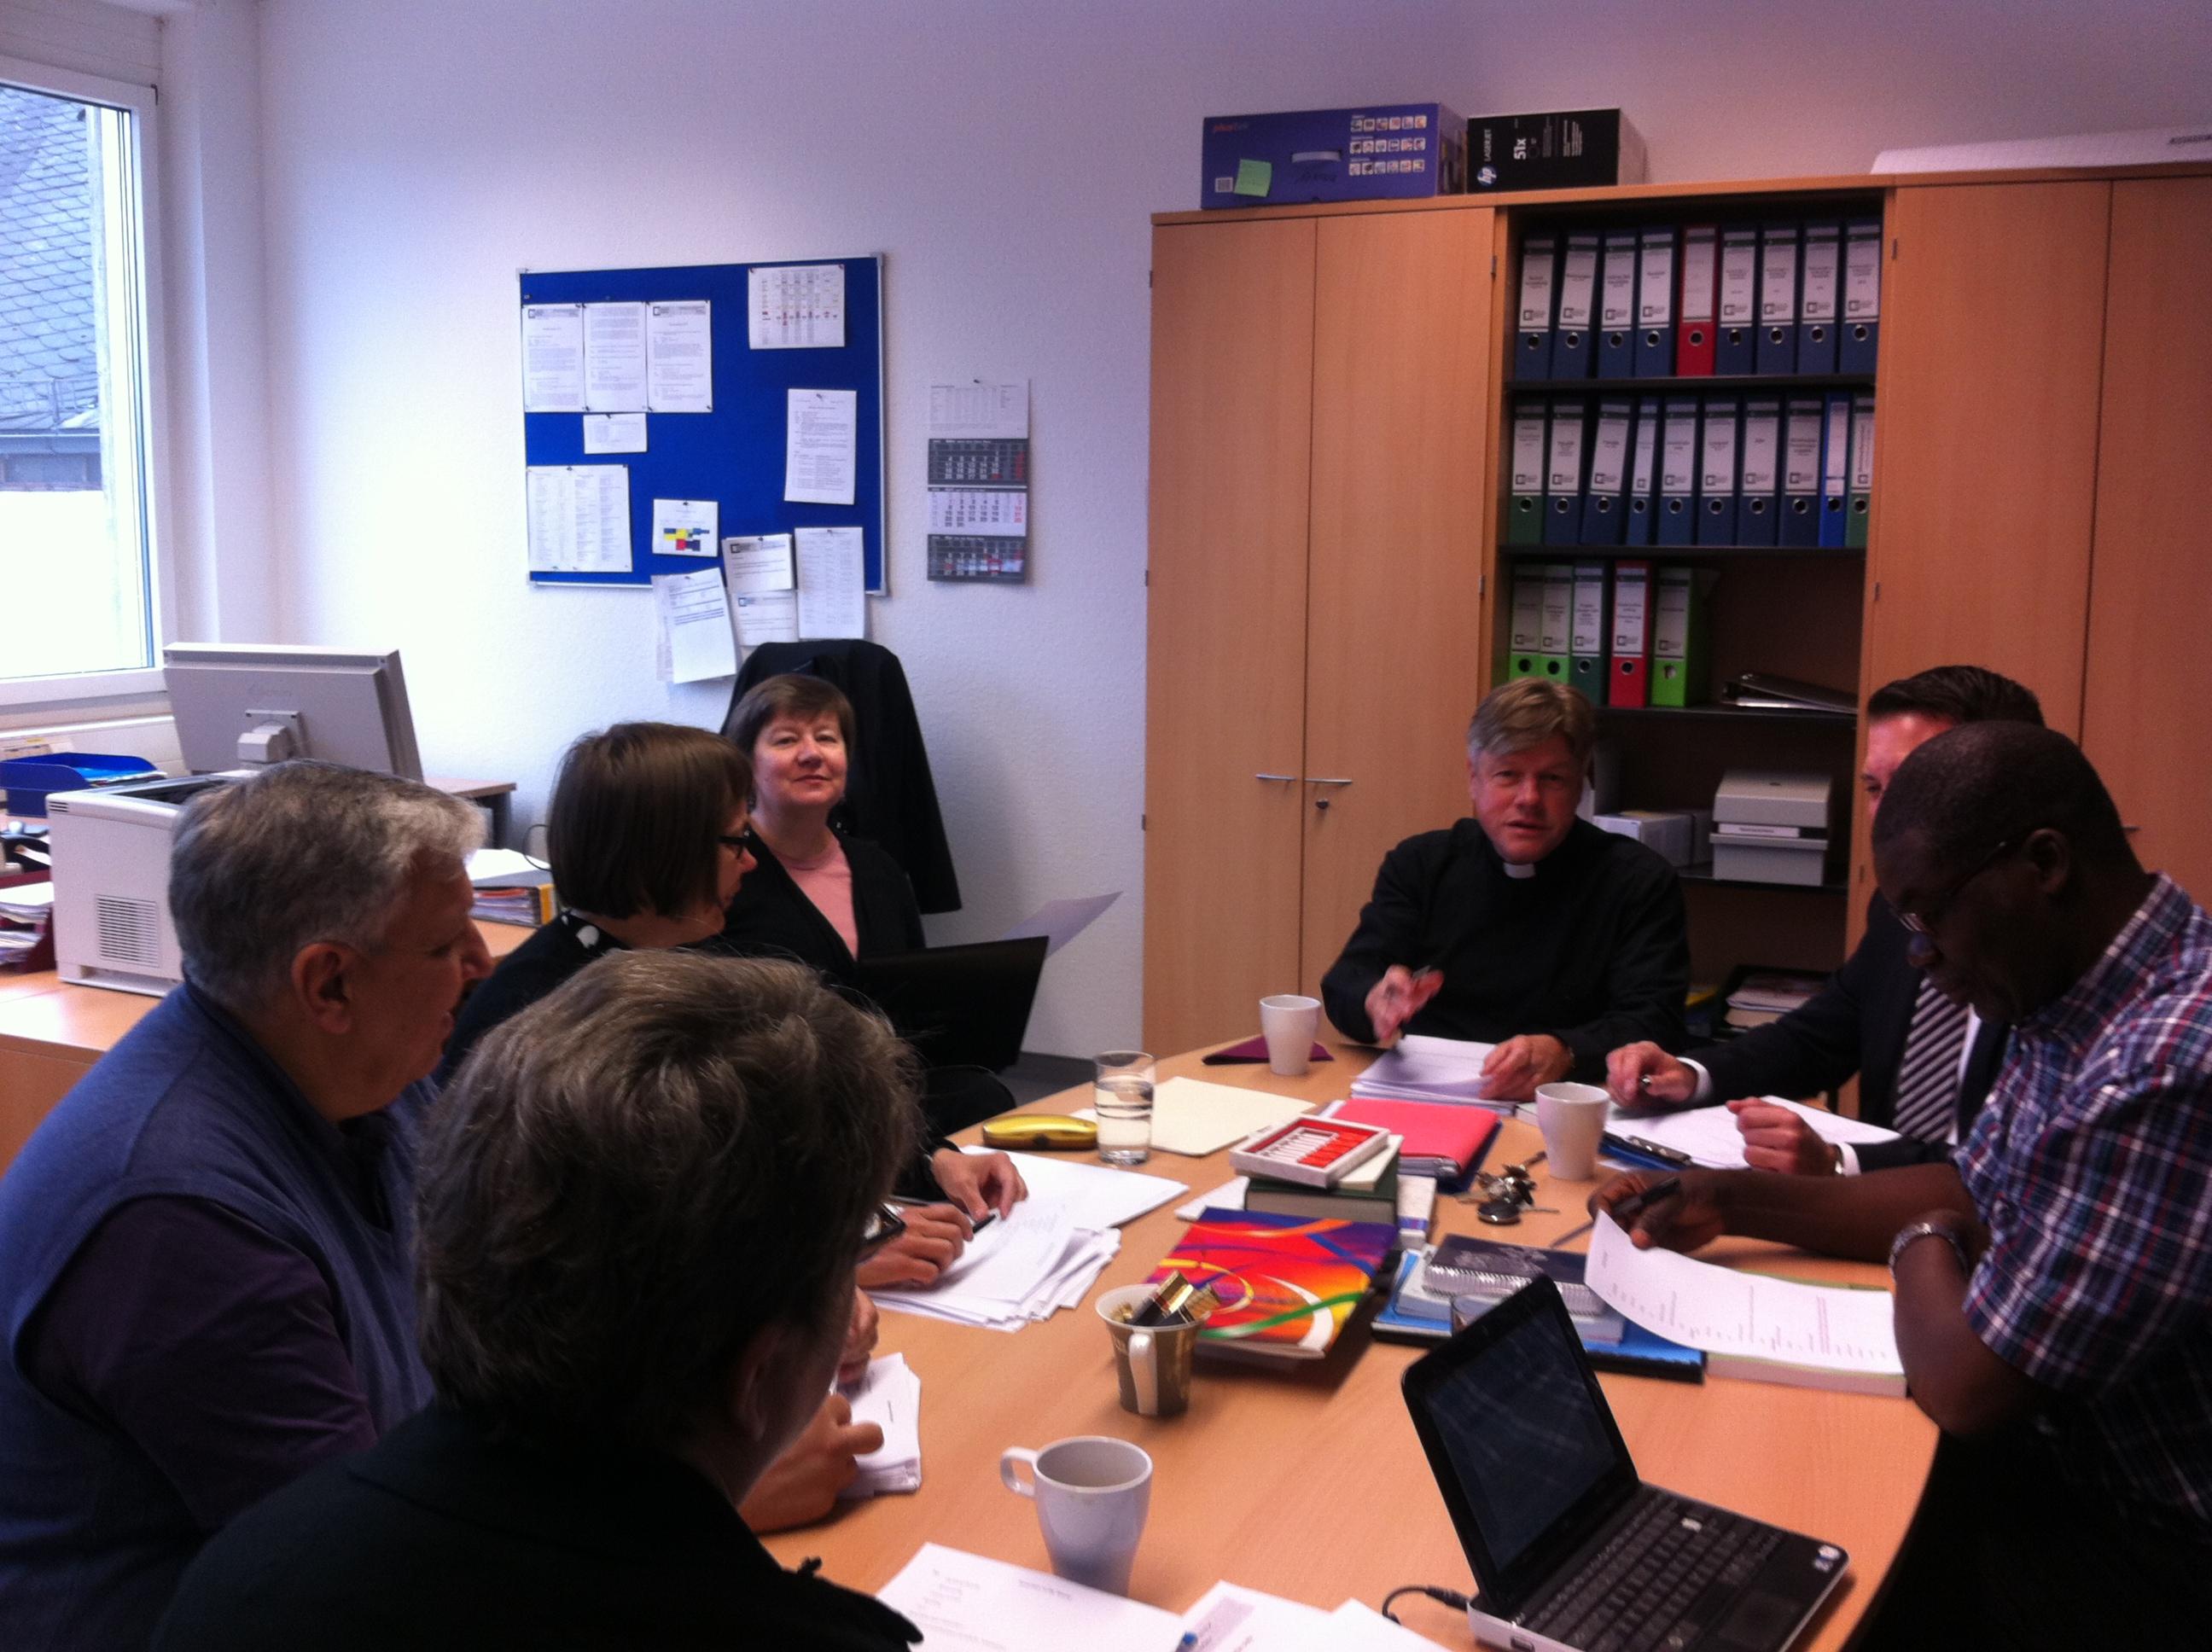 Members of the LWF-PCPCU liturgical working group at their first meeting in Würzburg, Germany. LWF/A. Burghardt